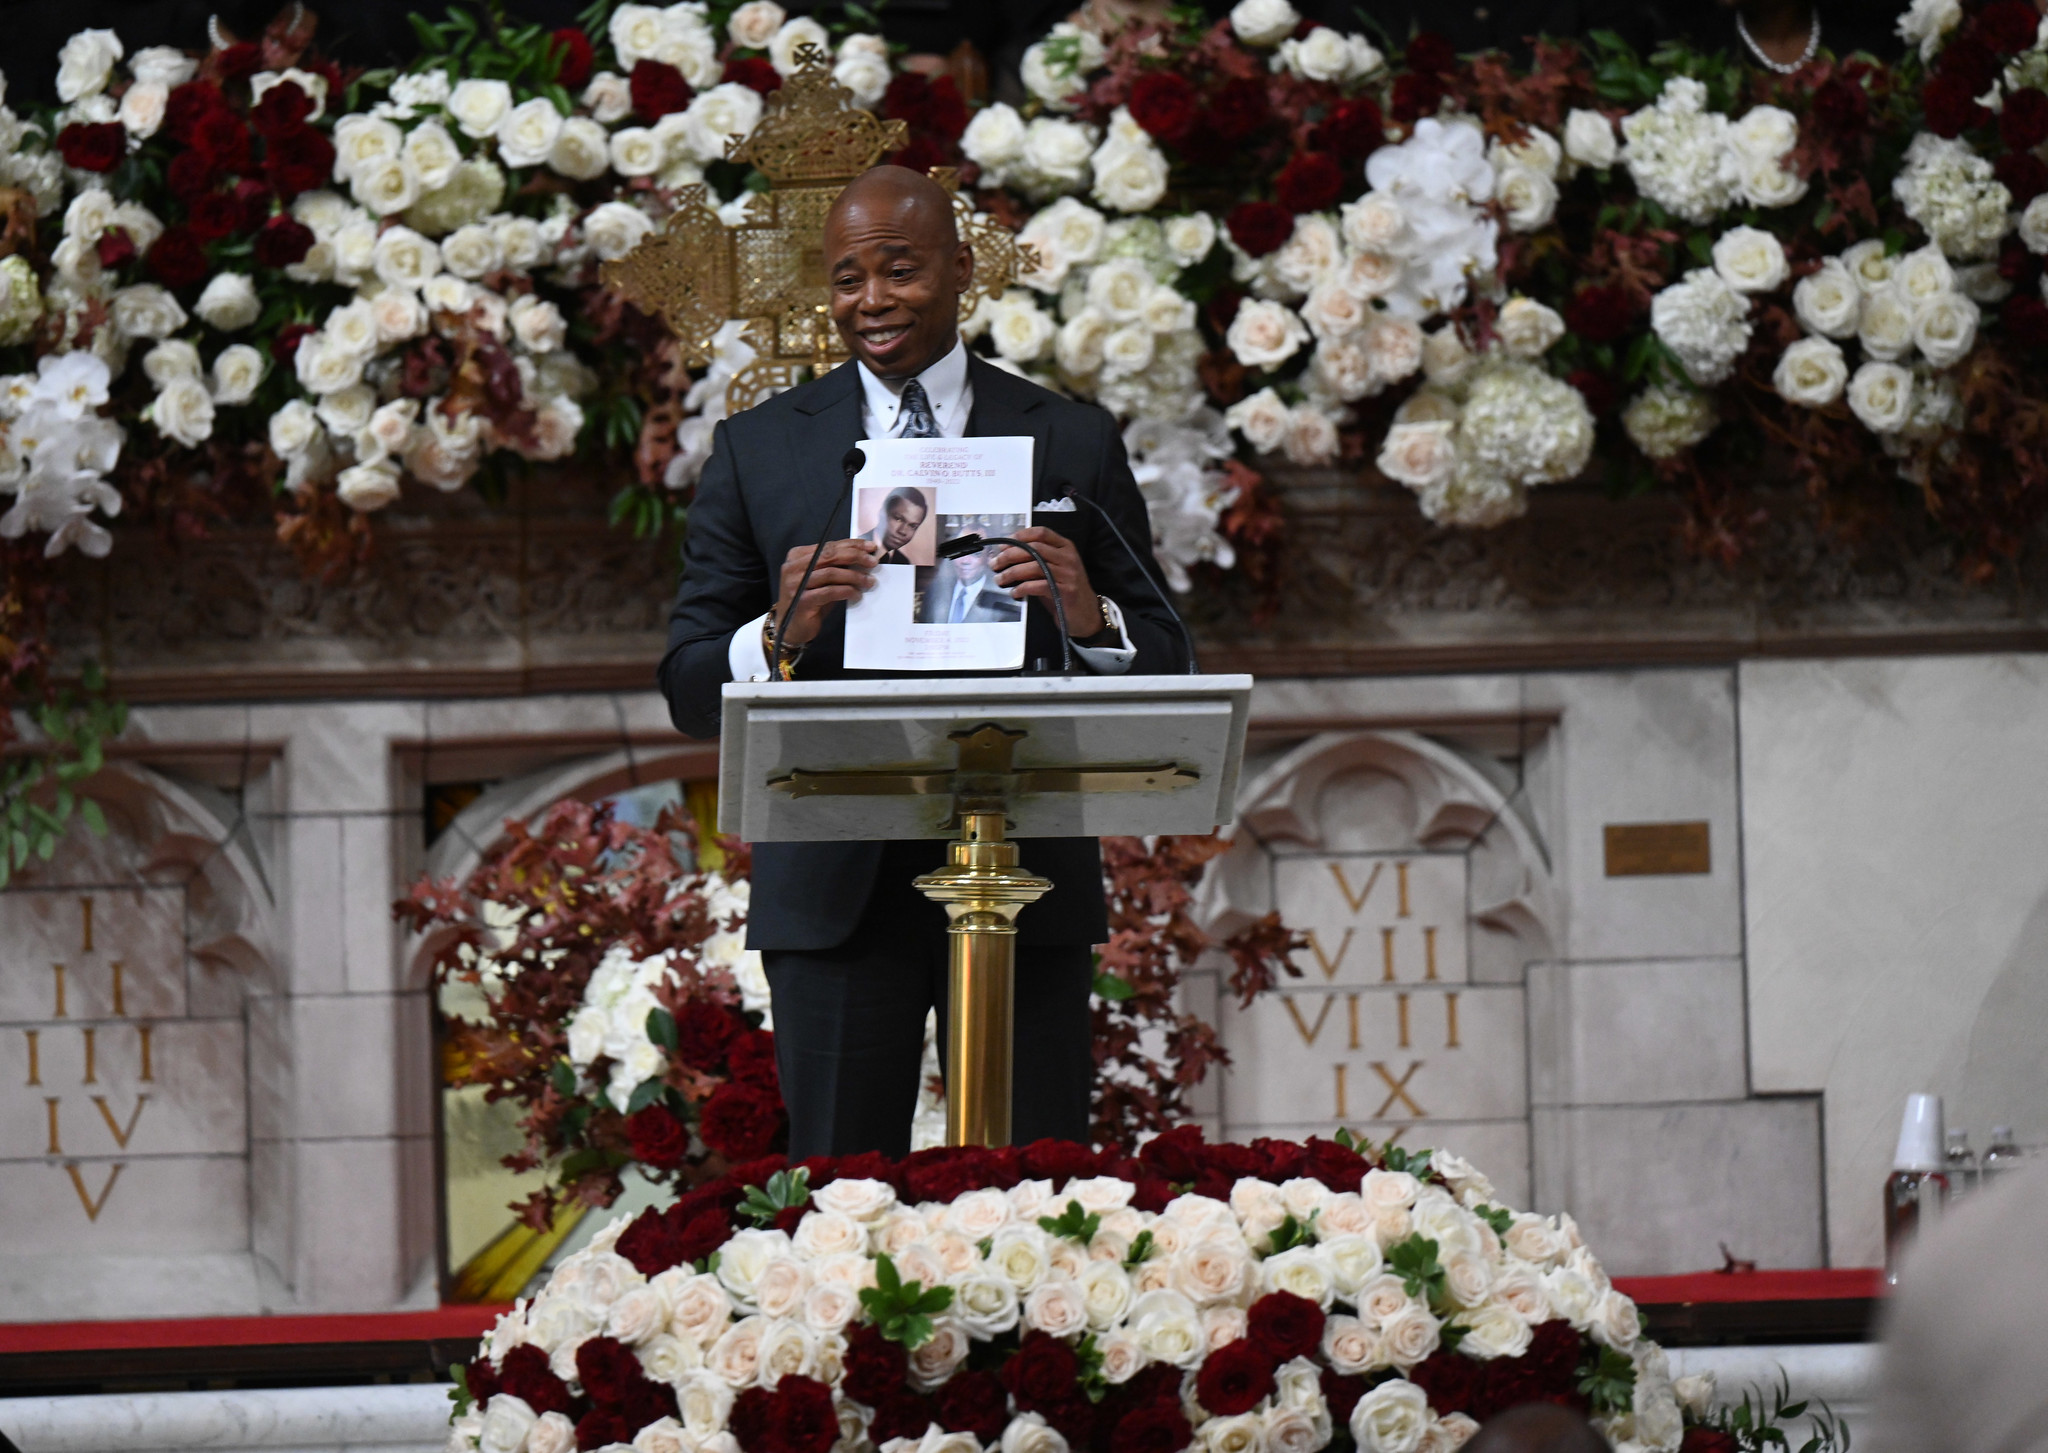 Electeds pay respects to late Rev. Dr. Calvin Butts III at funeral service